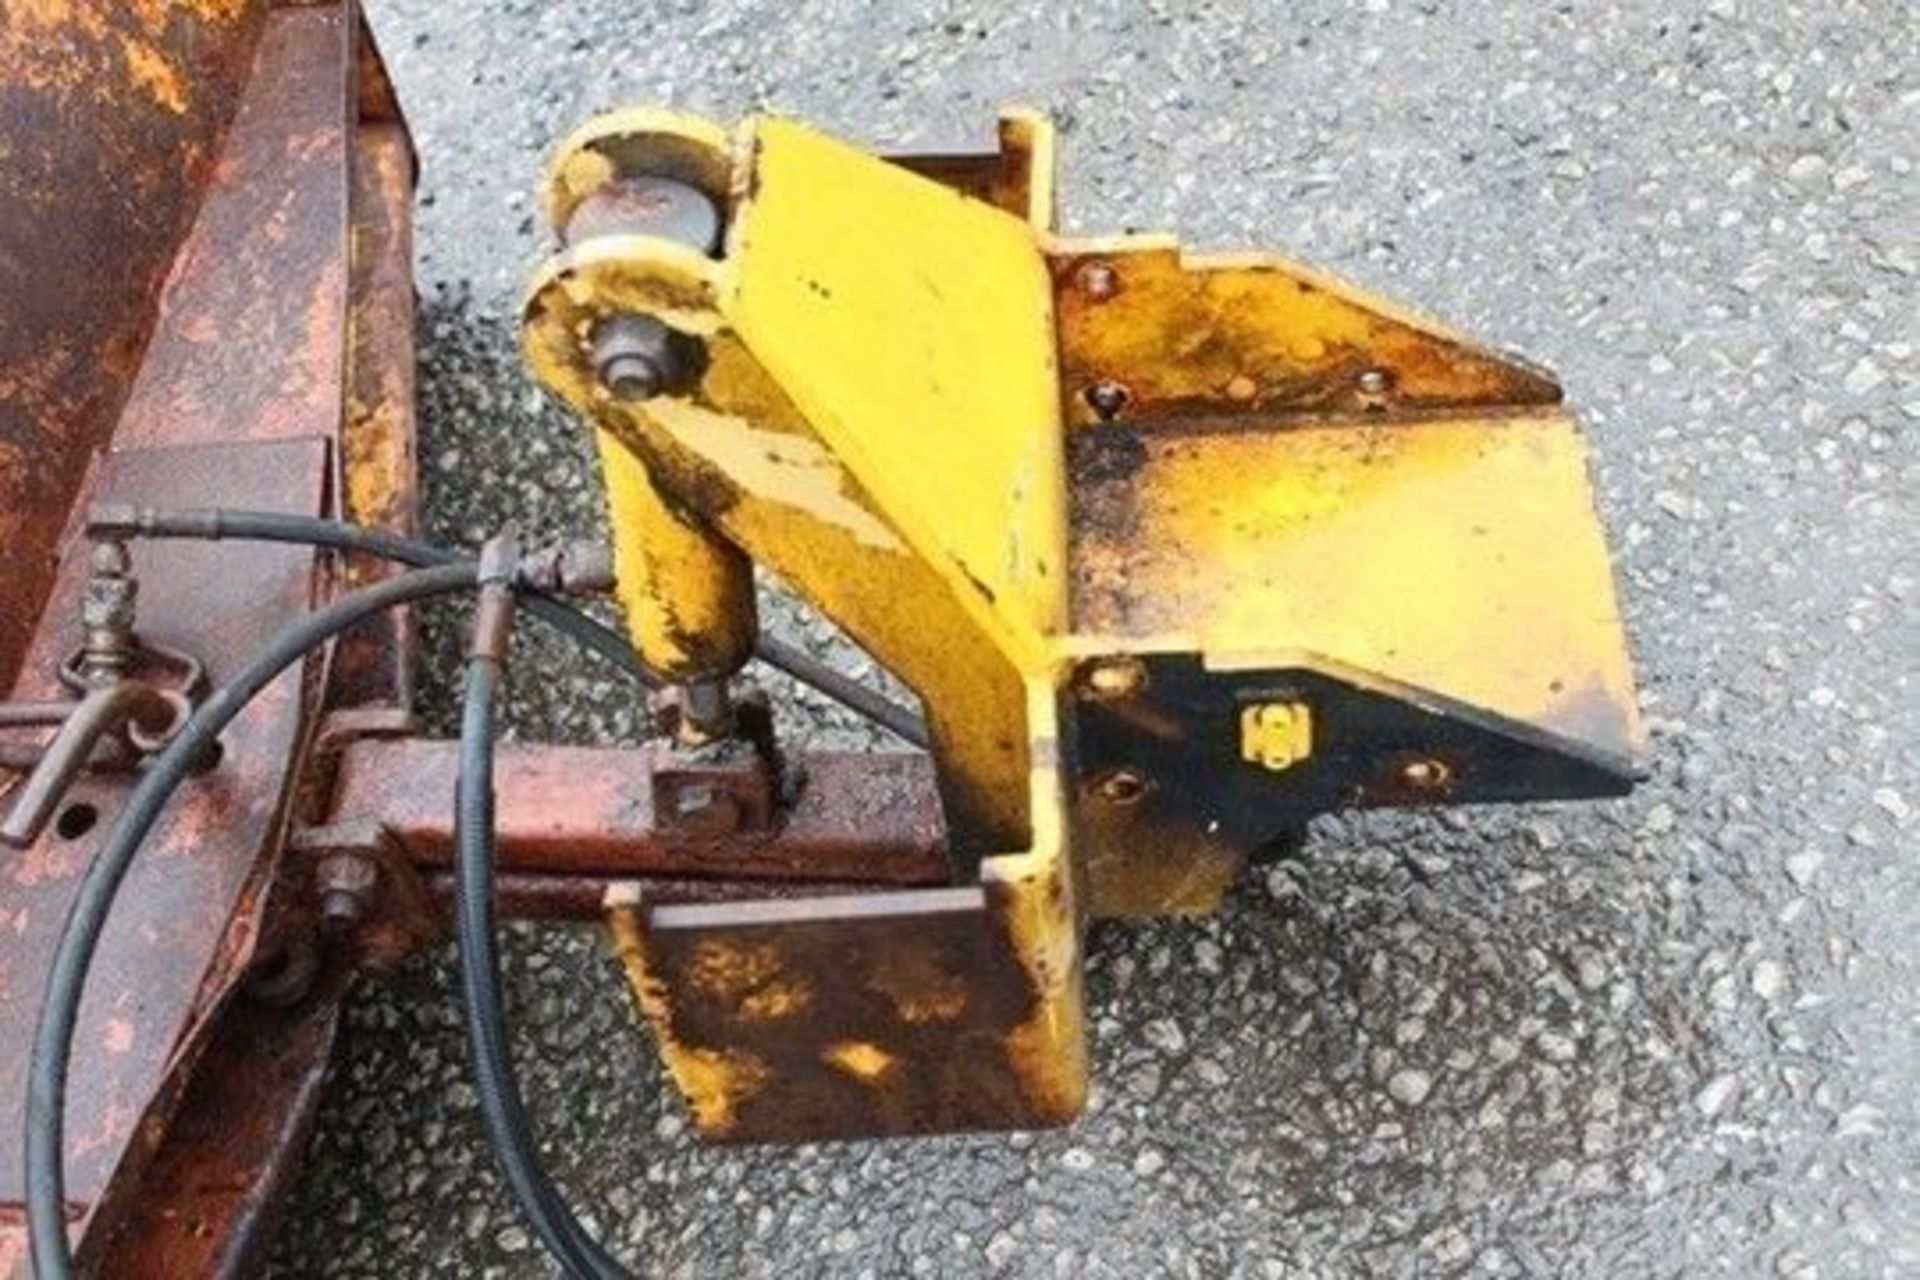 Snow Plow Attachment For Compact Tractor - Image 3 of 5